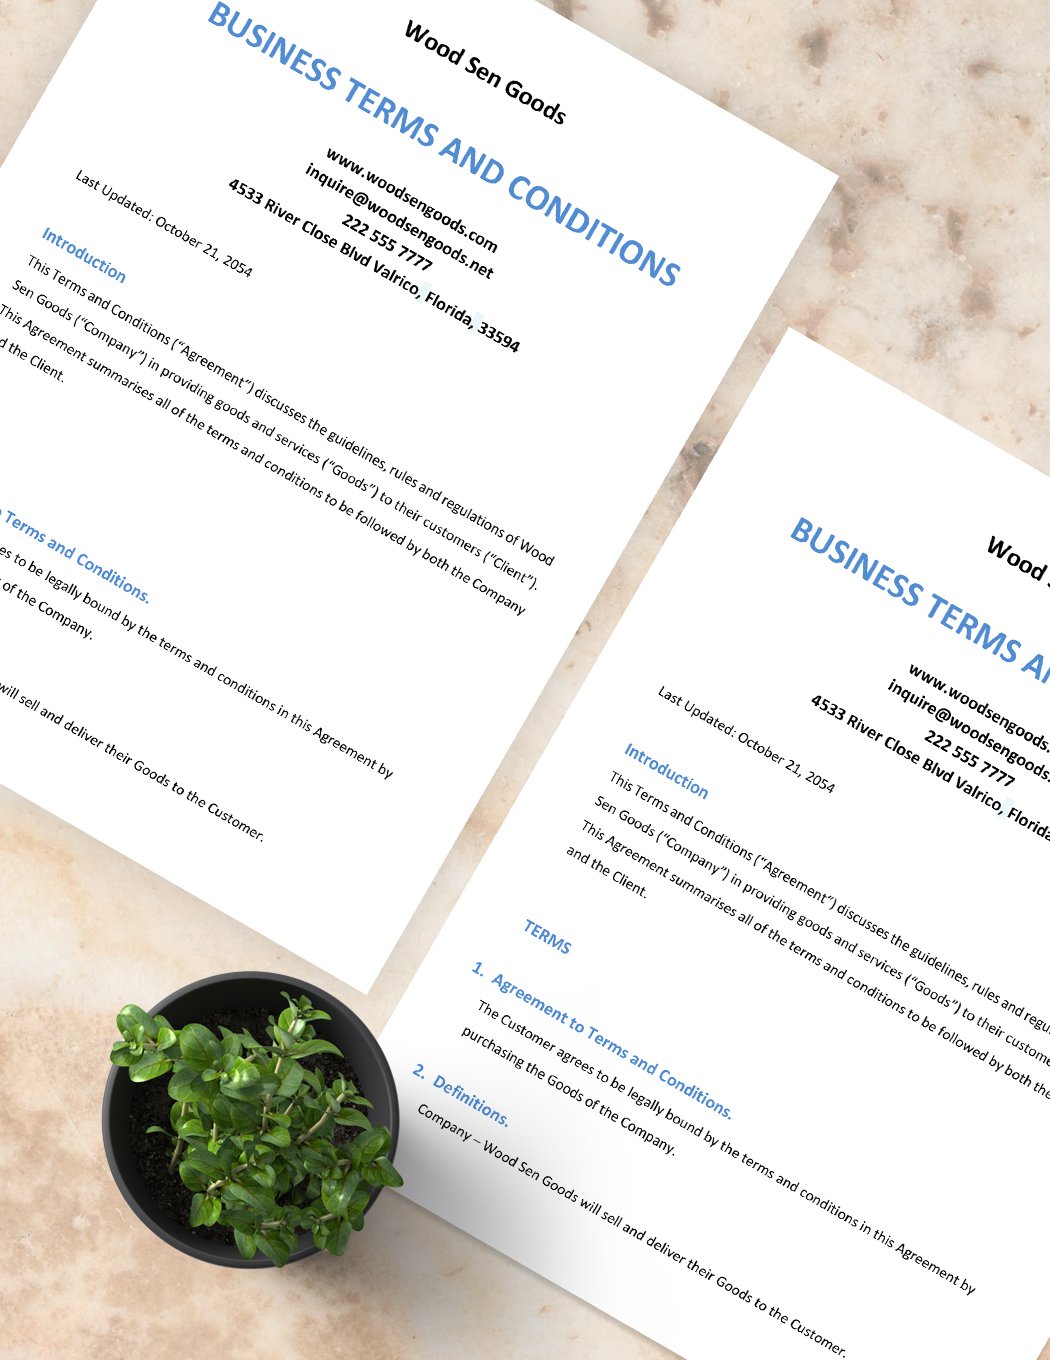 Business Terms And Conditions Template